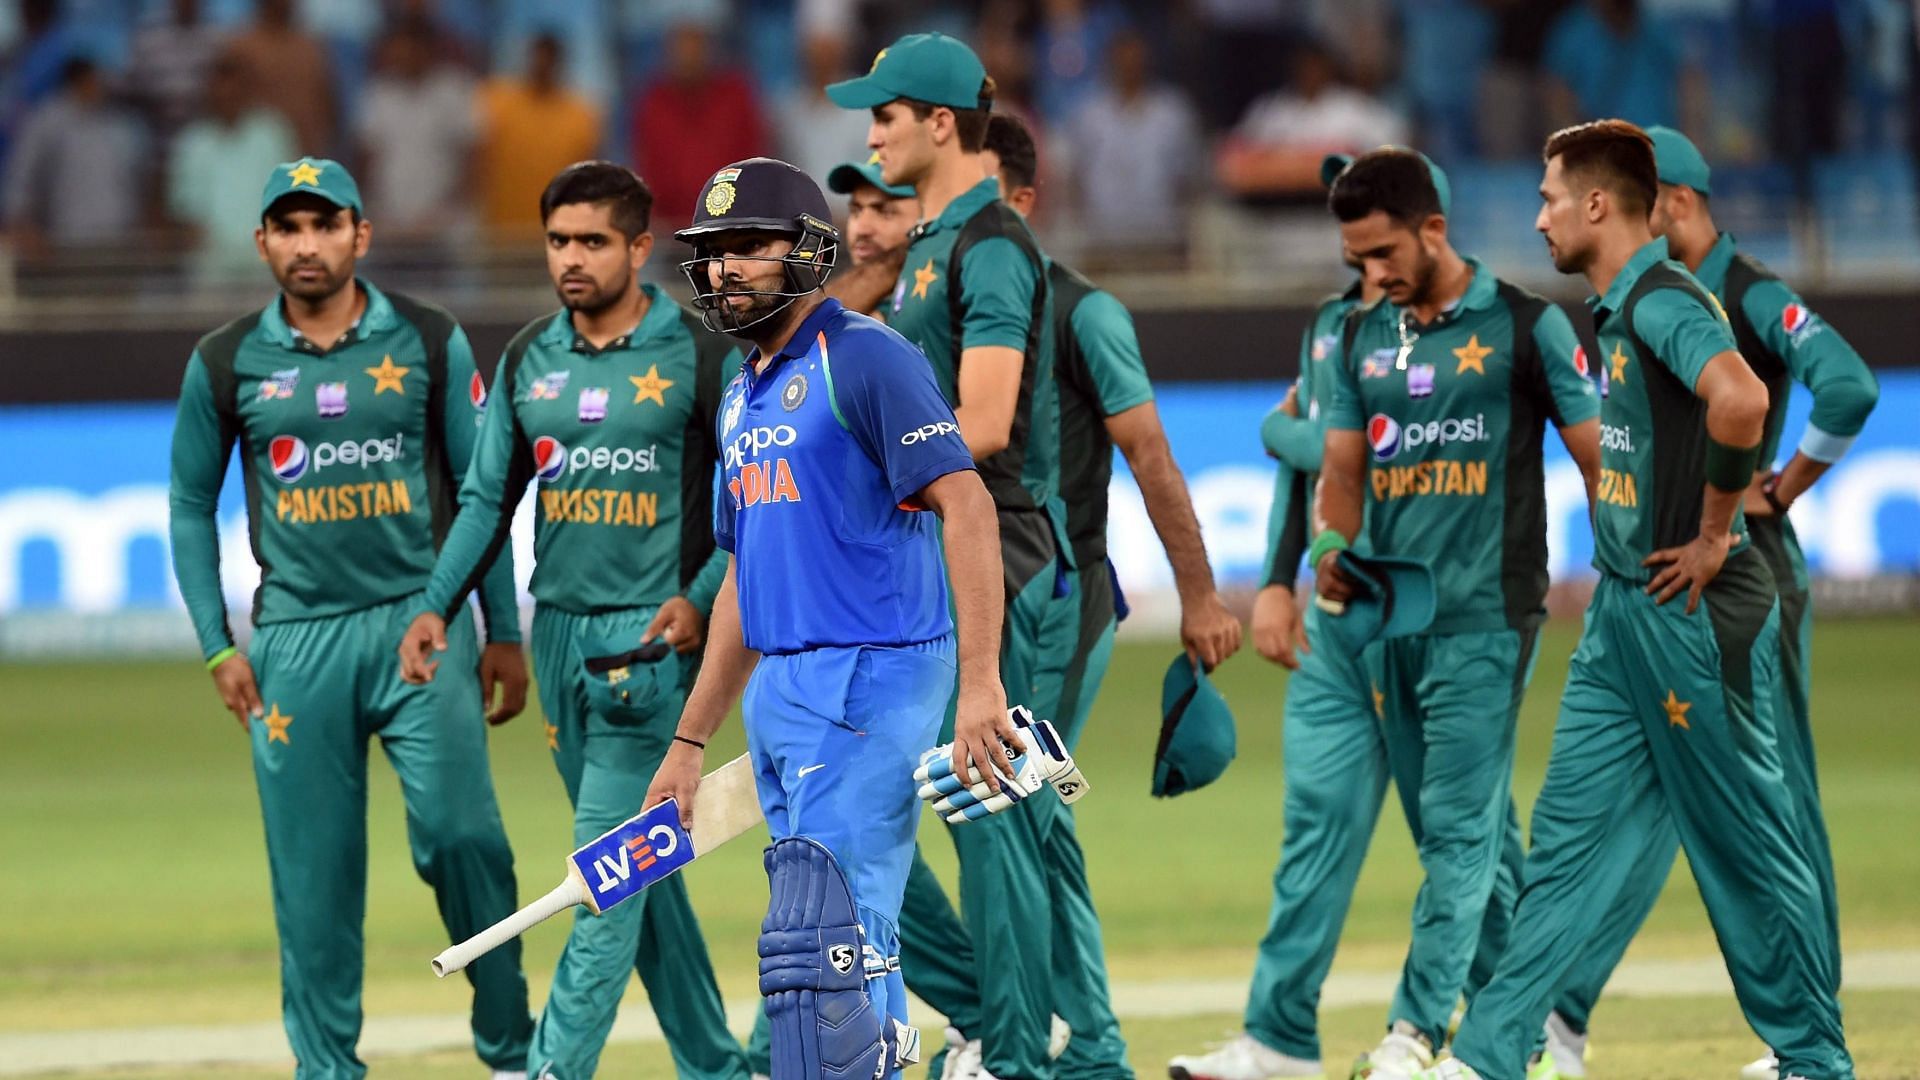 India has dominated Pakistan in Asia Cup over the years